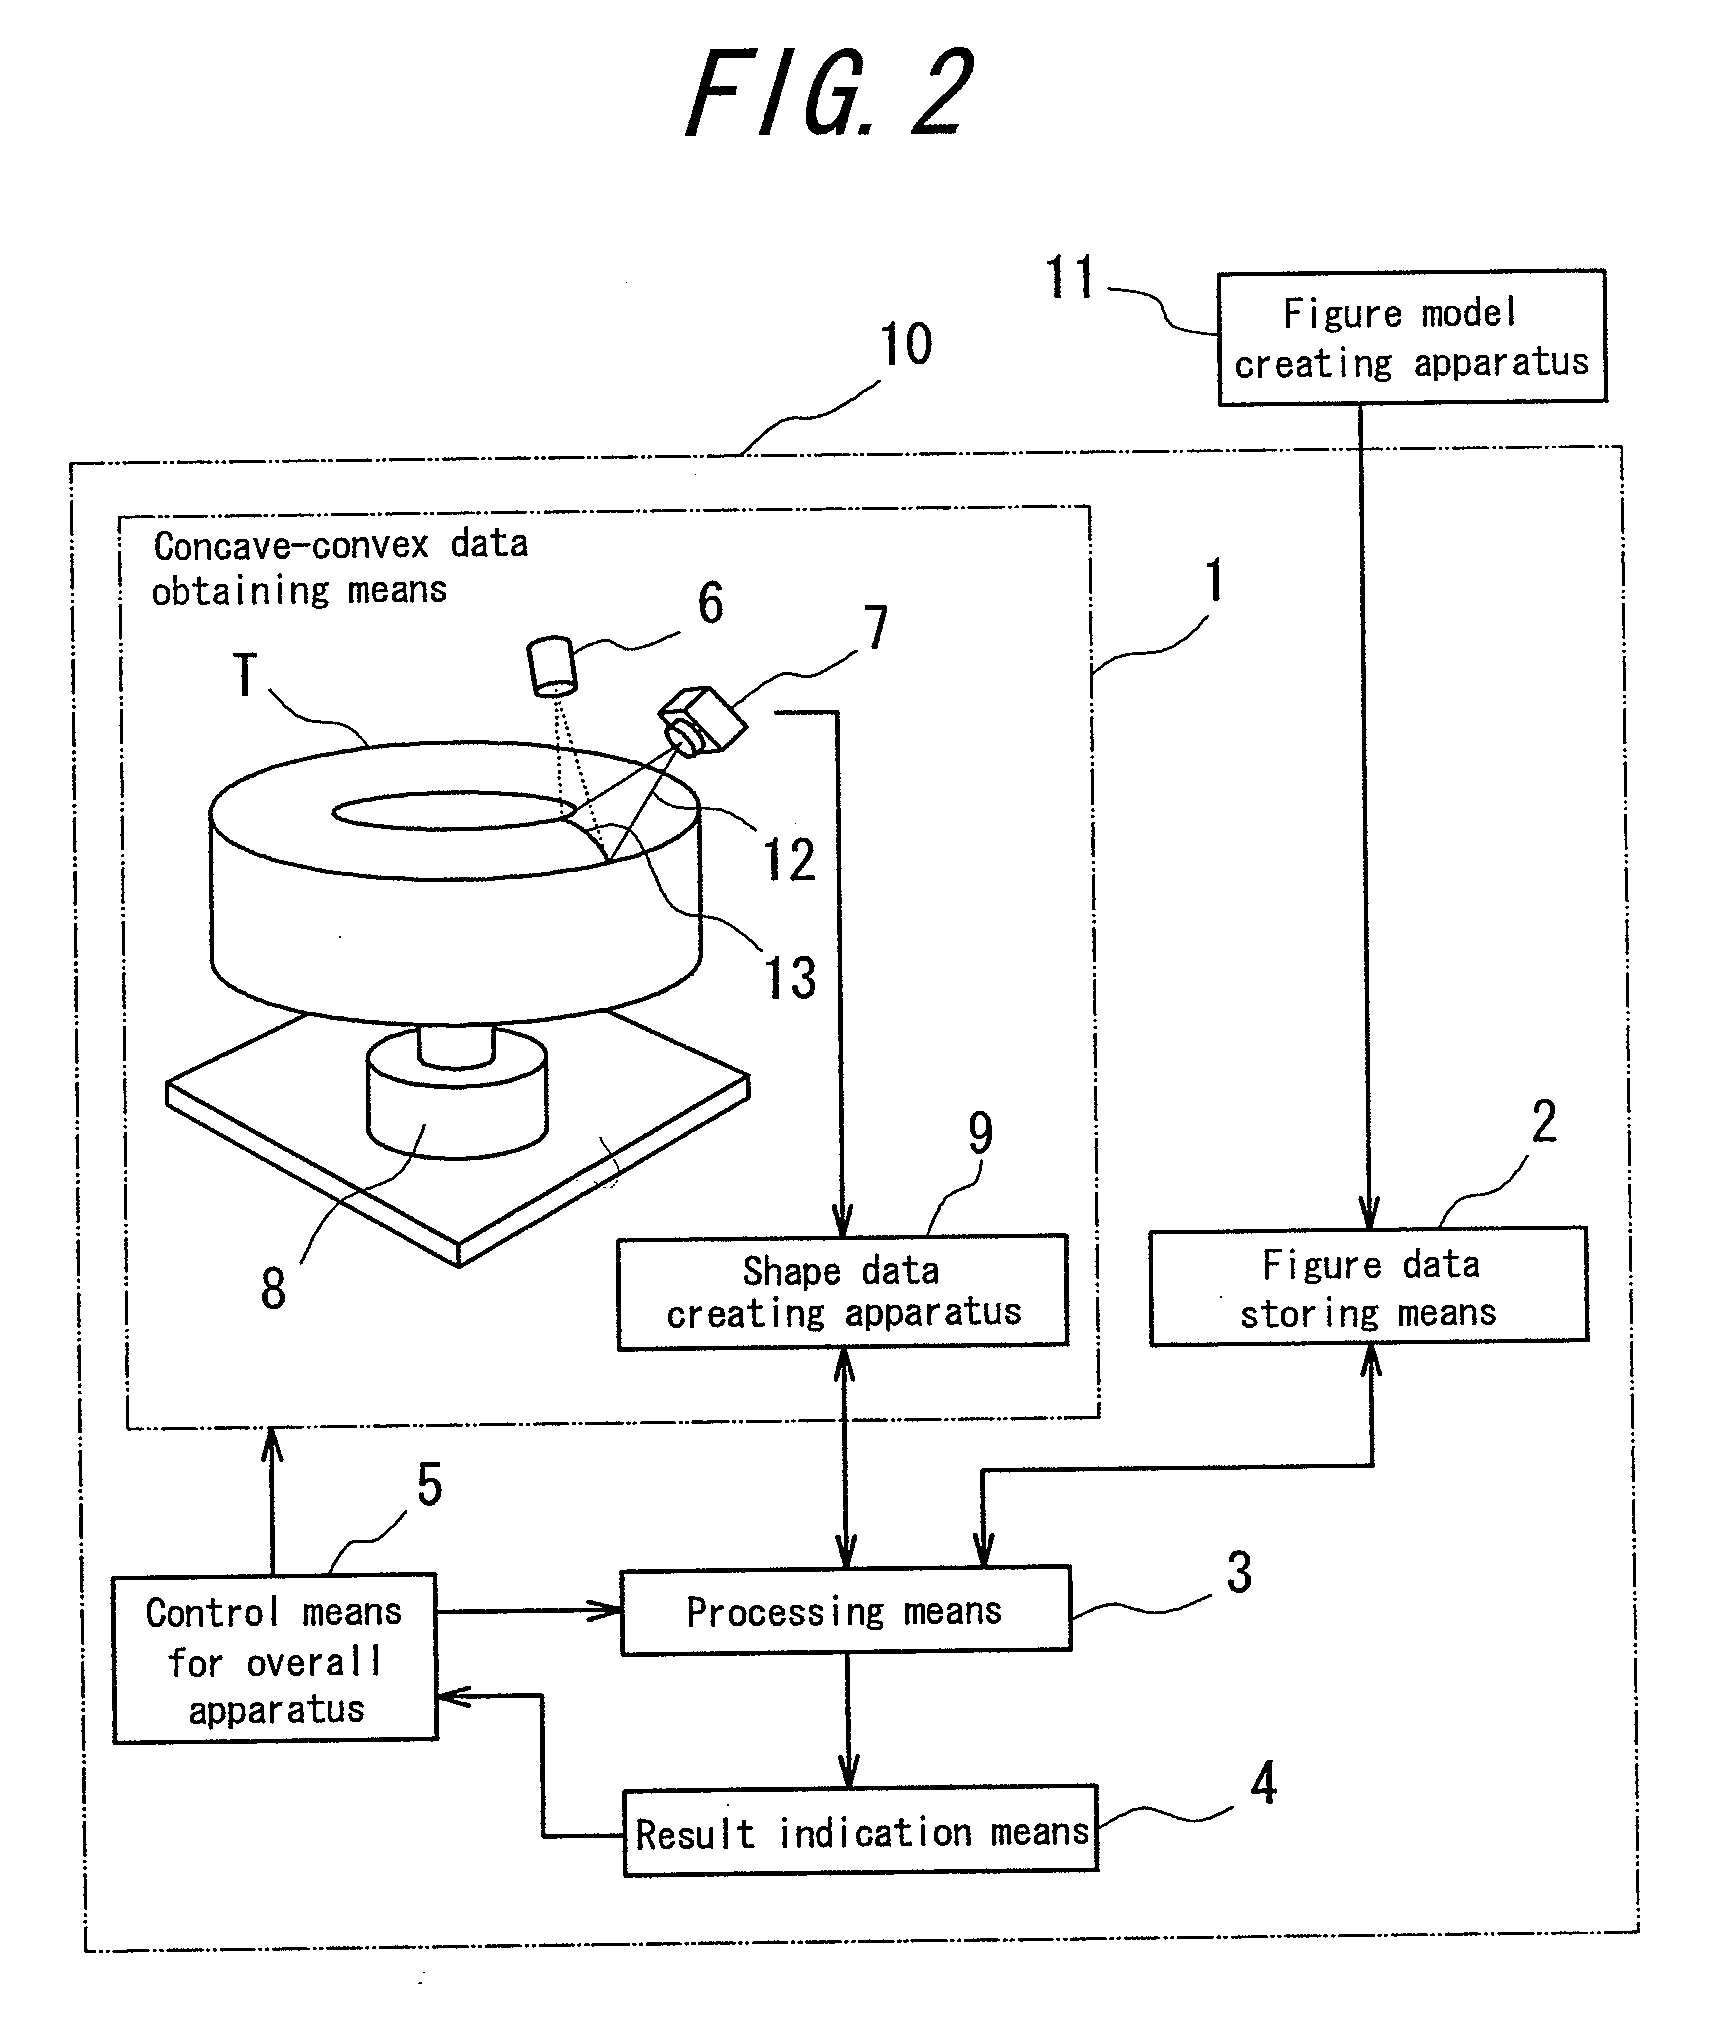 Method of creating master data used for inspecting concave-convex figure